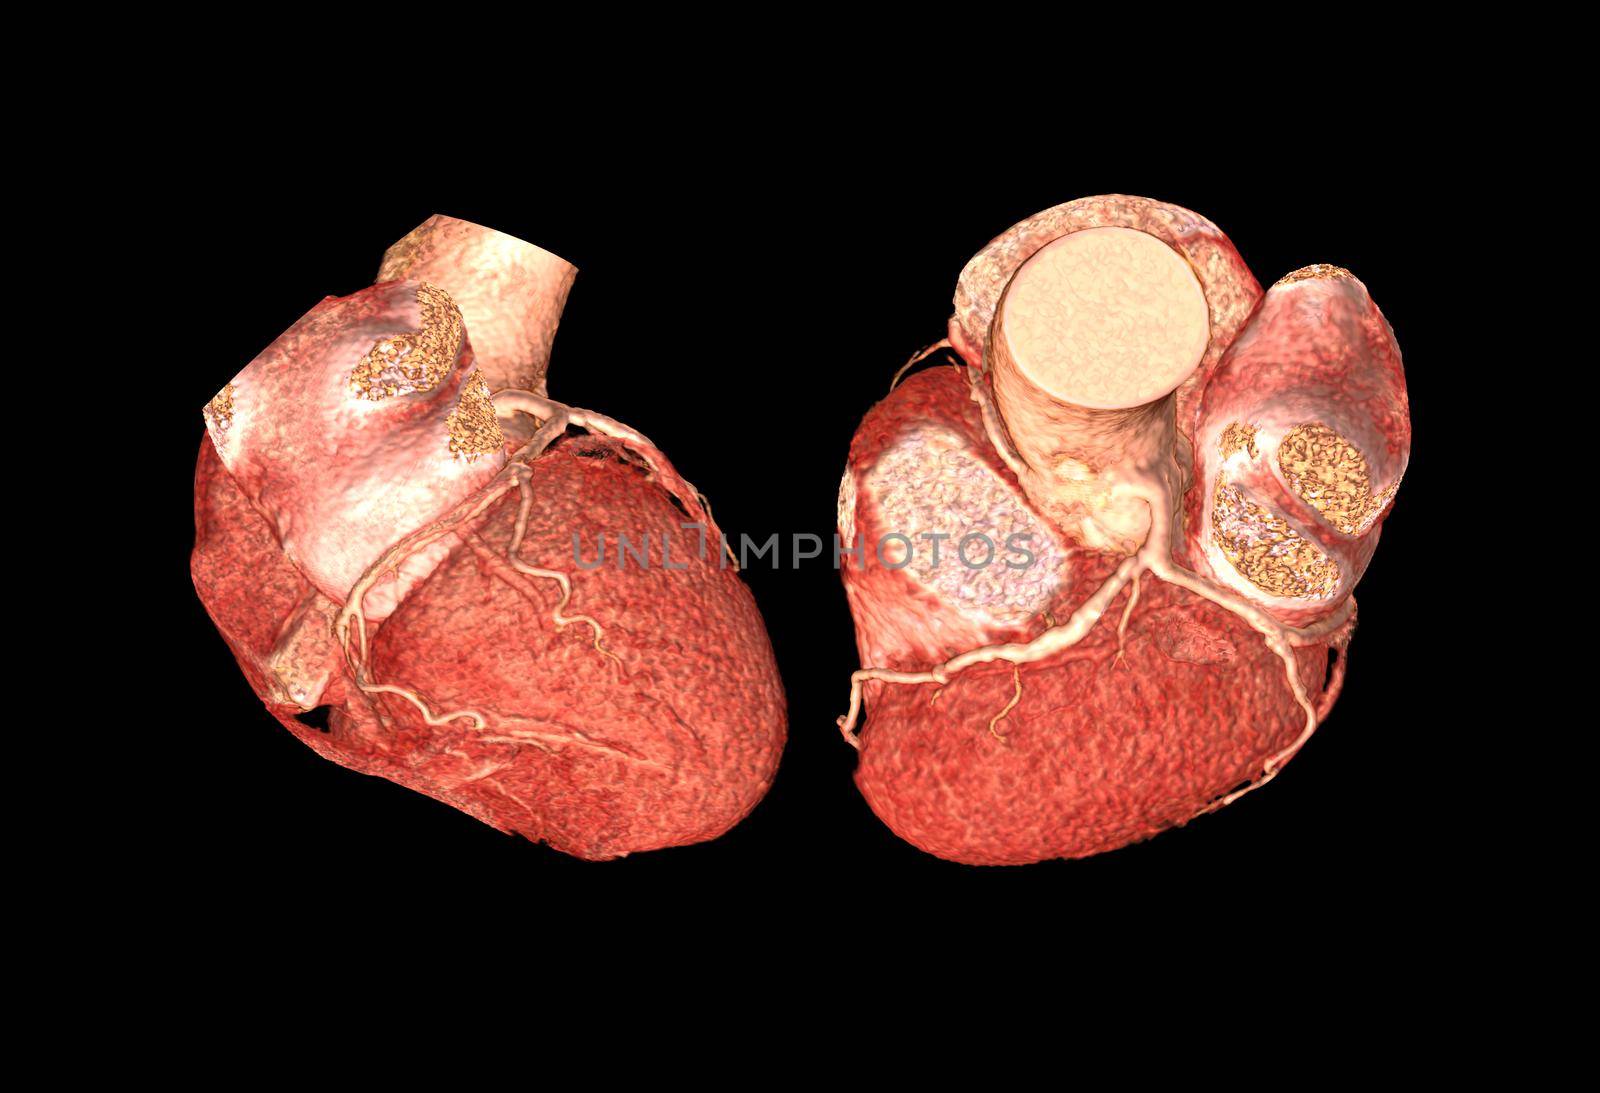 Lateral ad Top view of CTA Coronary artery 3D rendering image isolated o black backgroud for finding coronary artery disease.